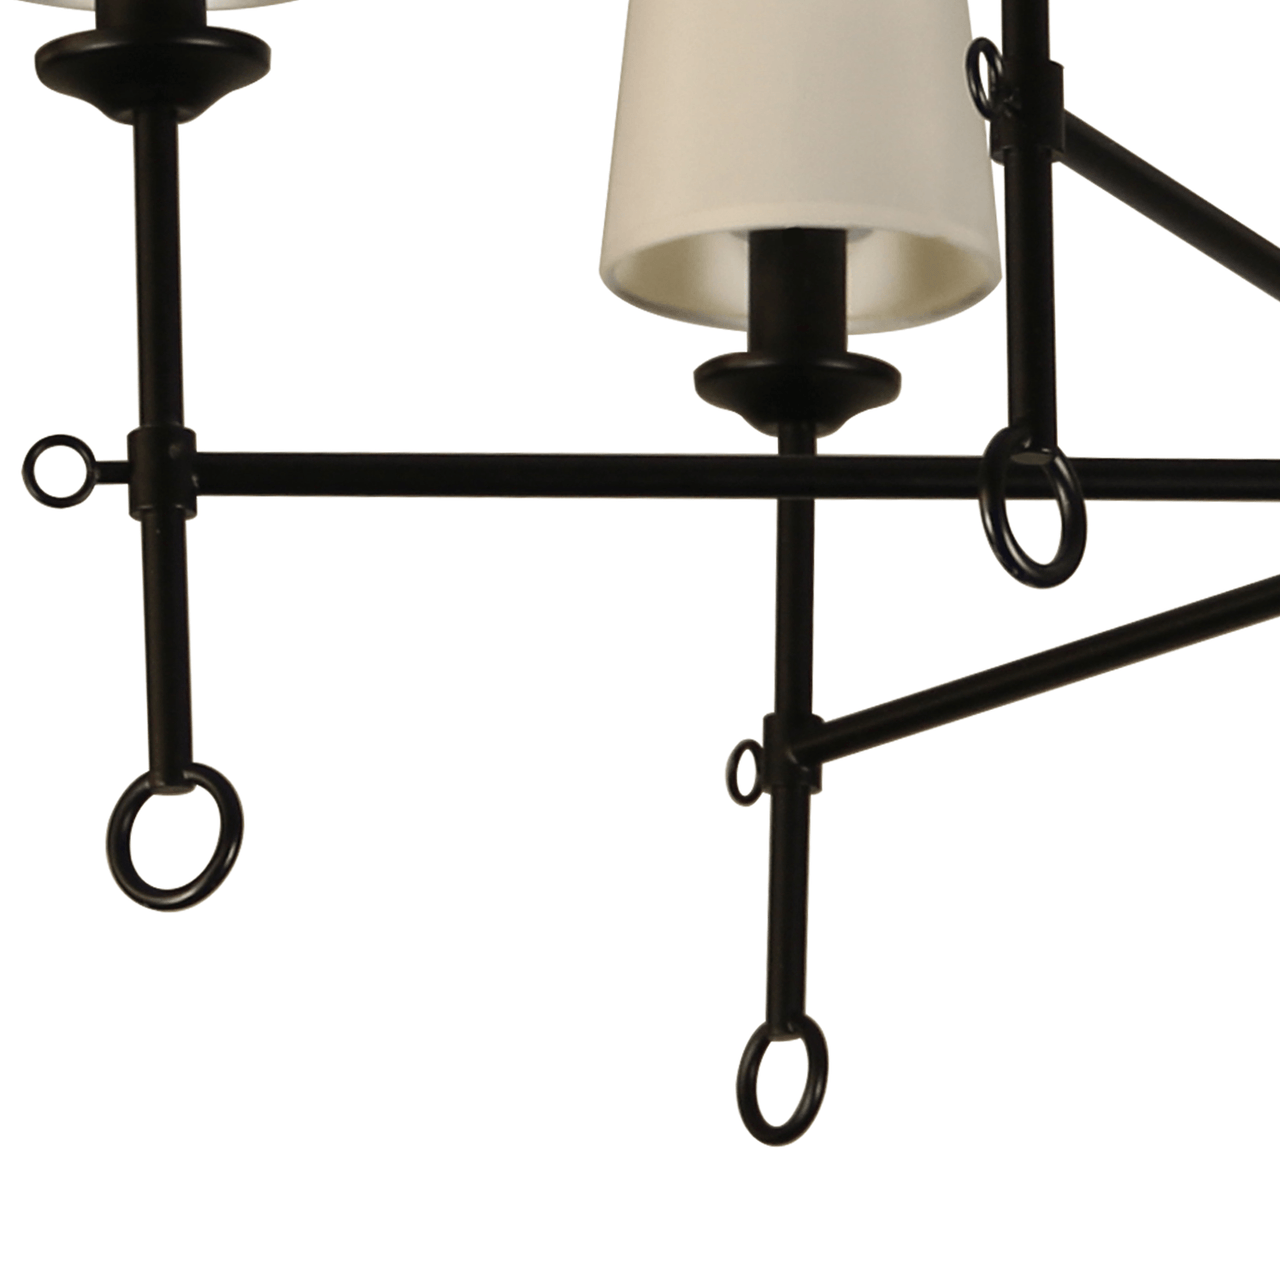 Angya 6-Shade Chandelier Light | Bamboo Lampshades and Matte Black Steel Supports | Fixed 19” Center Rod | Dining Room, Foyer, Entryway Décor Chandeliers Canyon Home 